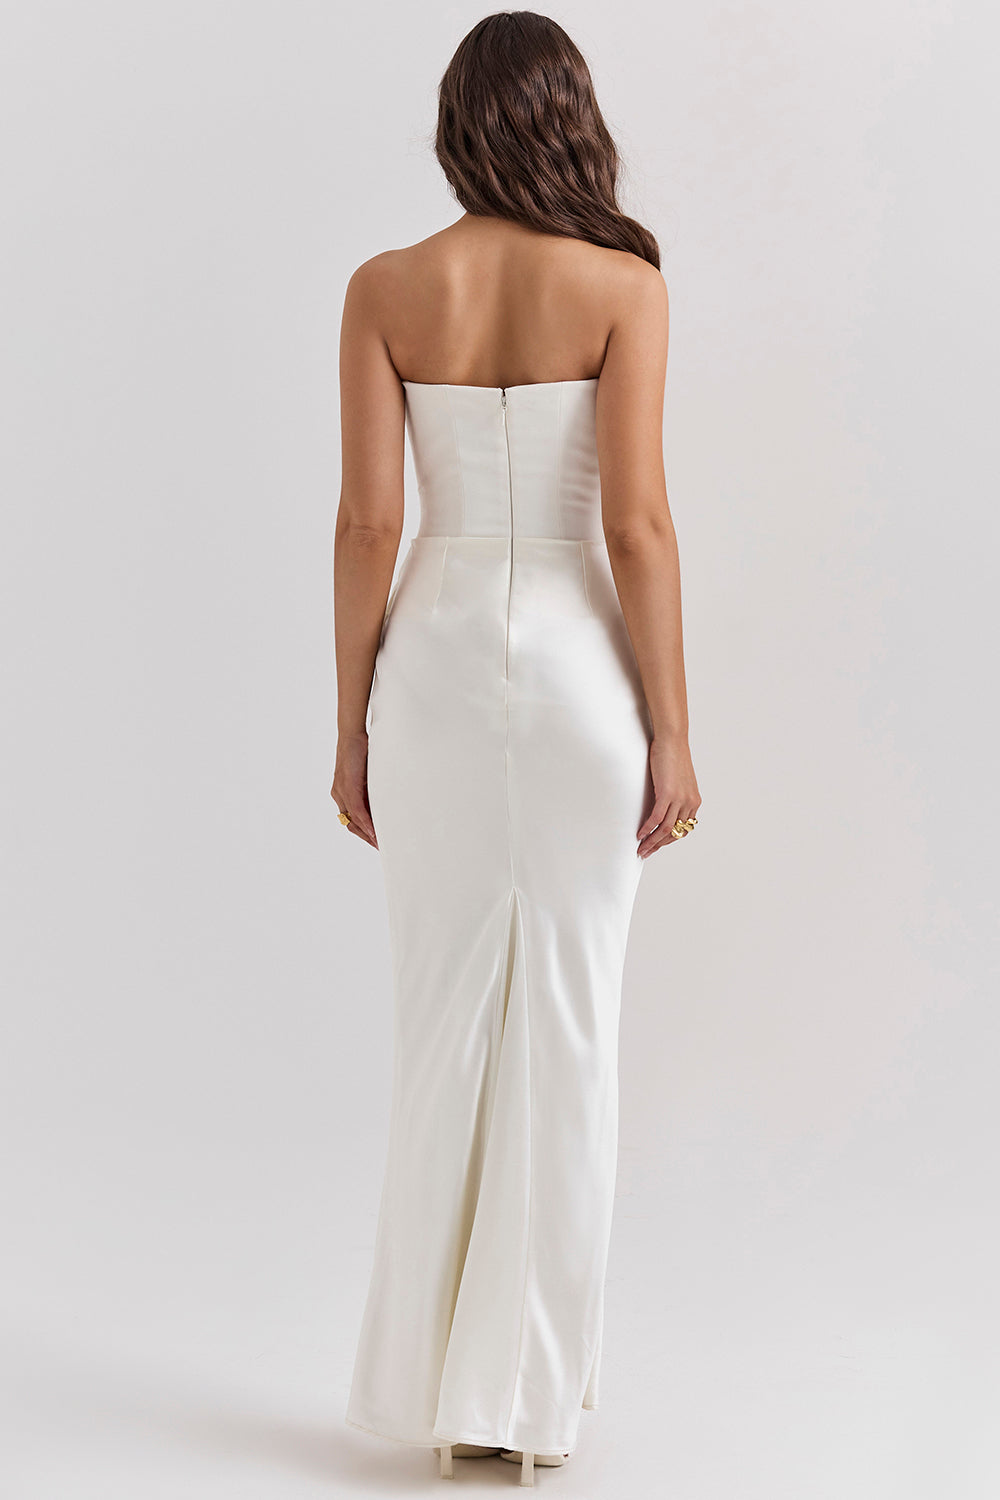 Hire HOUSE OF CB Persephone Strapless Corset Dress in Ivory